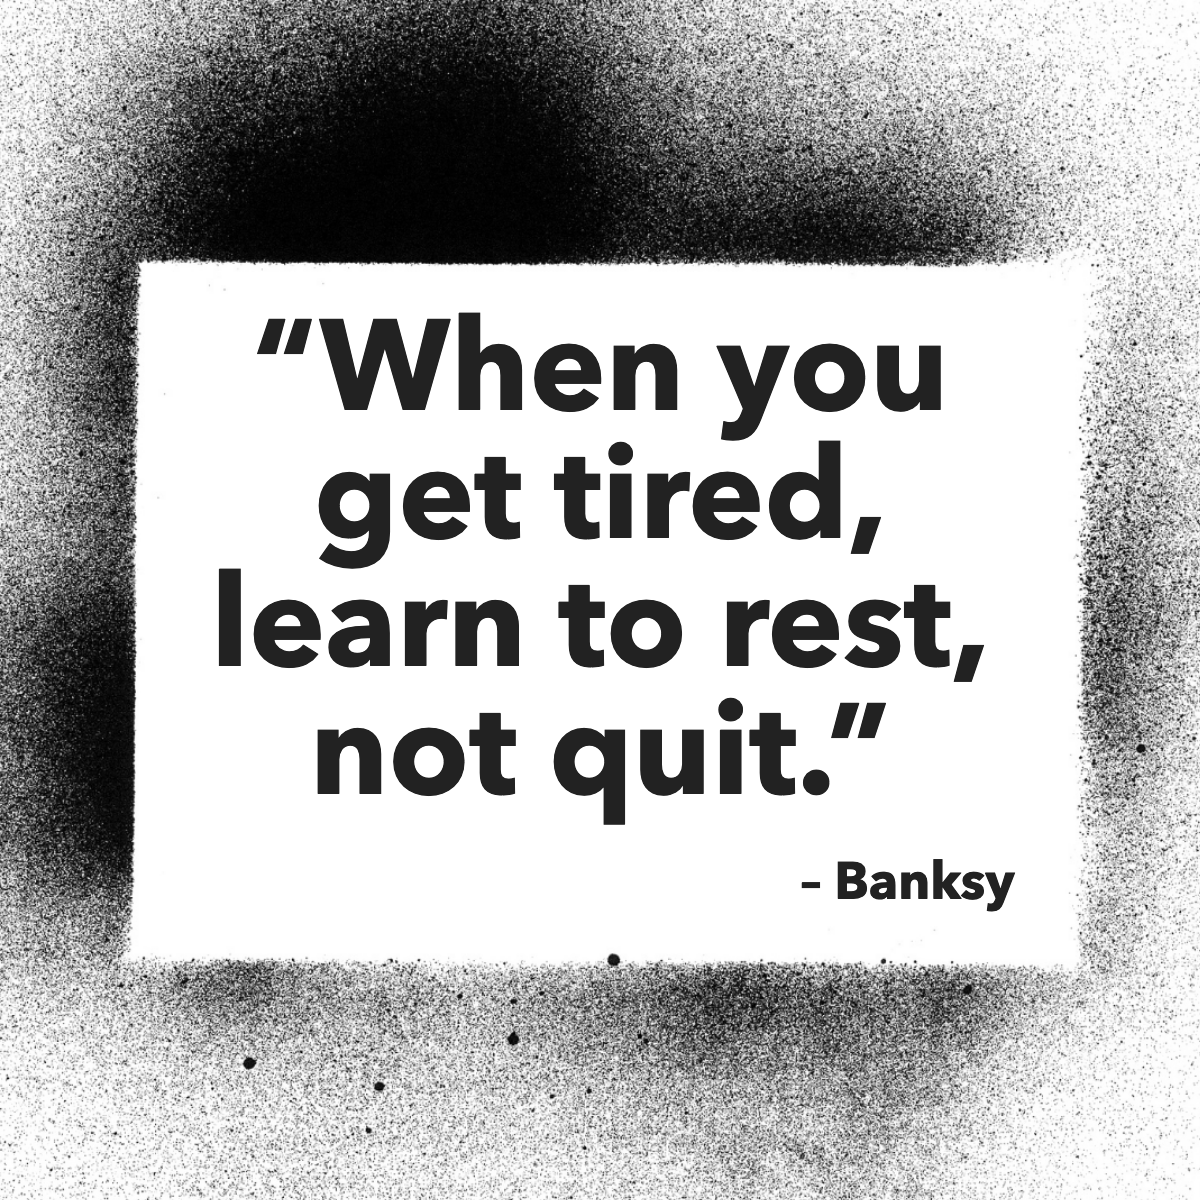 Don't feel guilty if you ever get tired, take your time ... 😉

#motivationnation #motivationalquotesdaily #quoteoftheday #quoteofday #quotedaily

 #chadwickknight #realtor #realestate #floridarealtor #floridarealestate #mvprealty #realestateadvisor #homesforsale